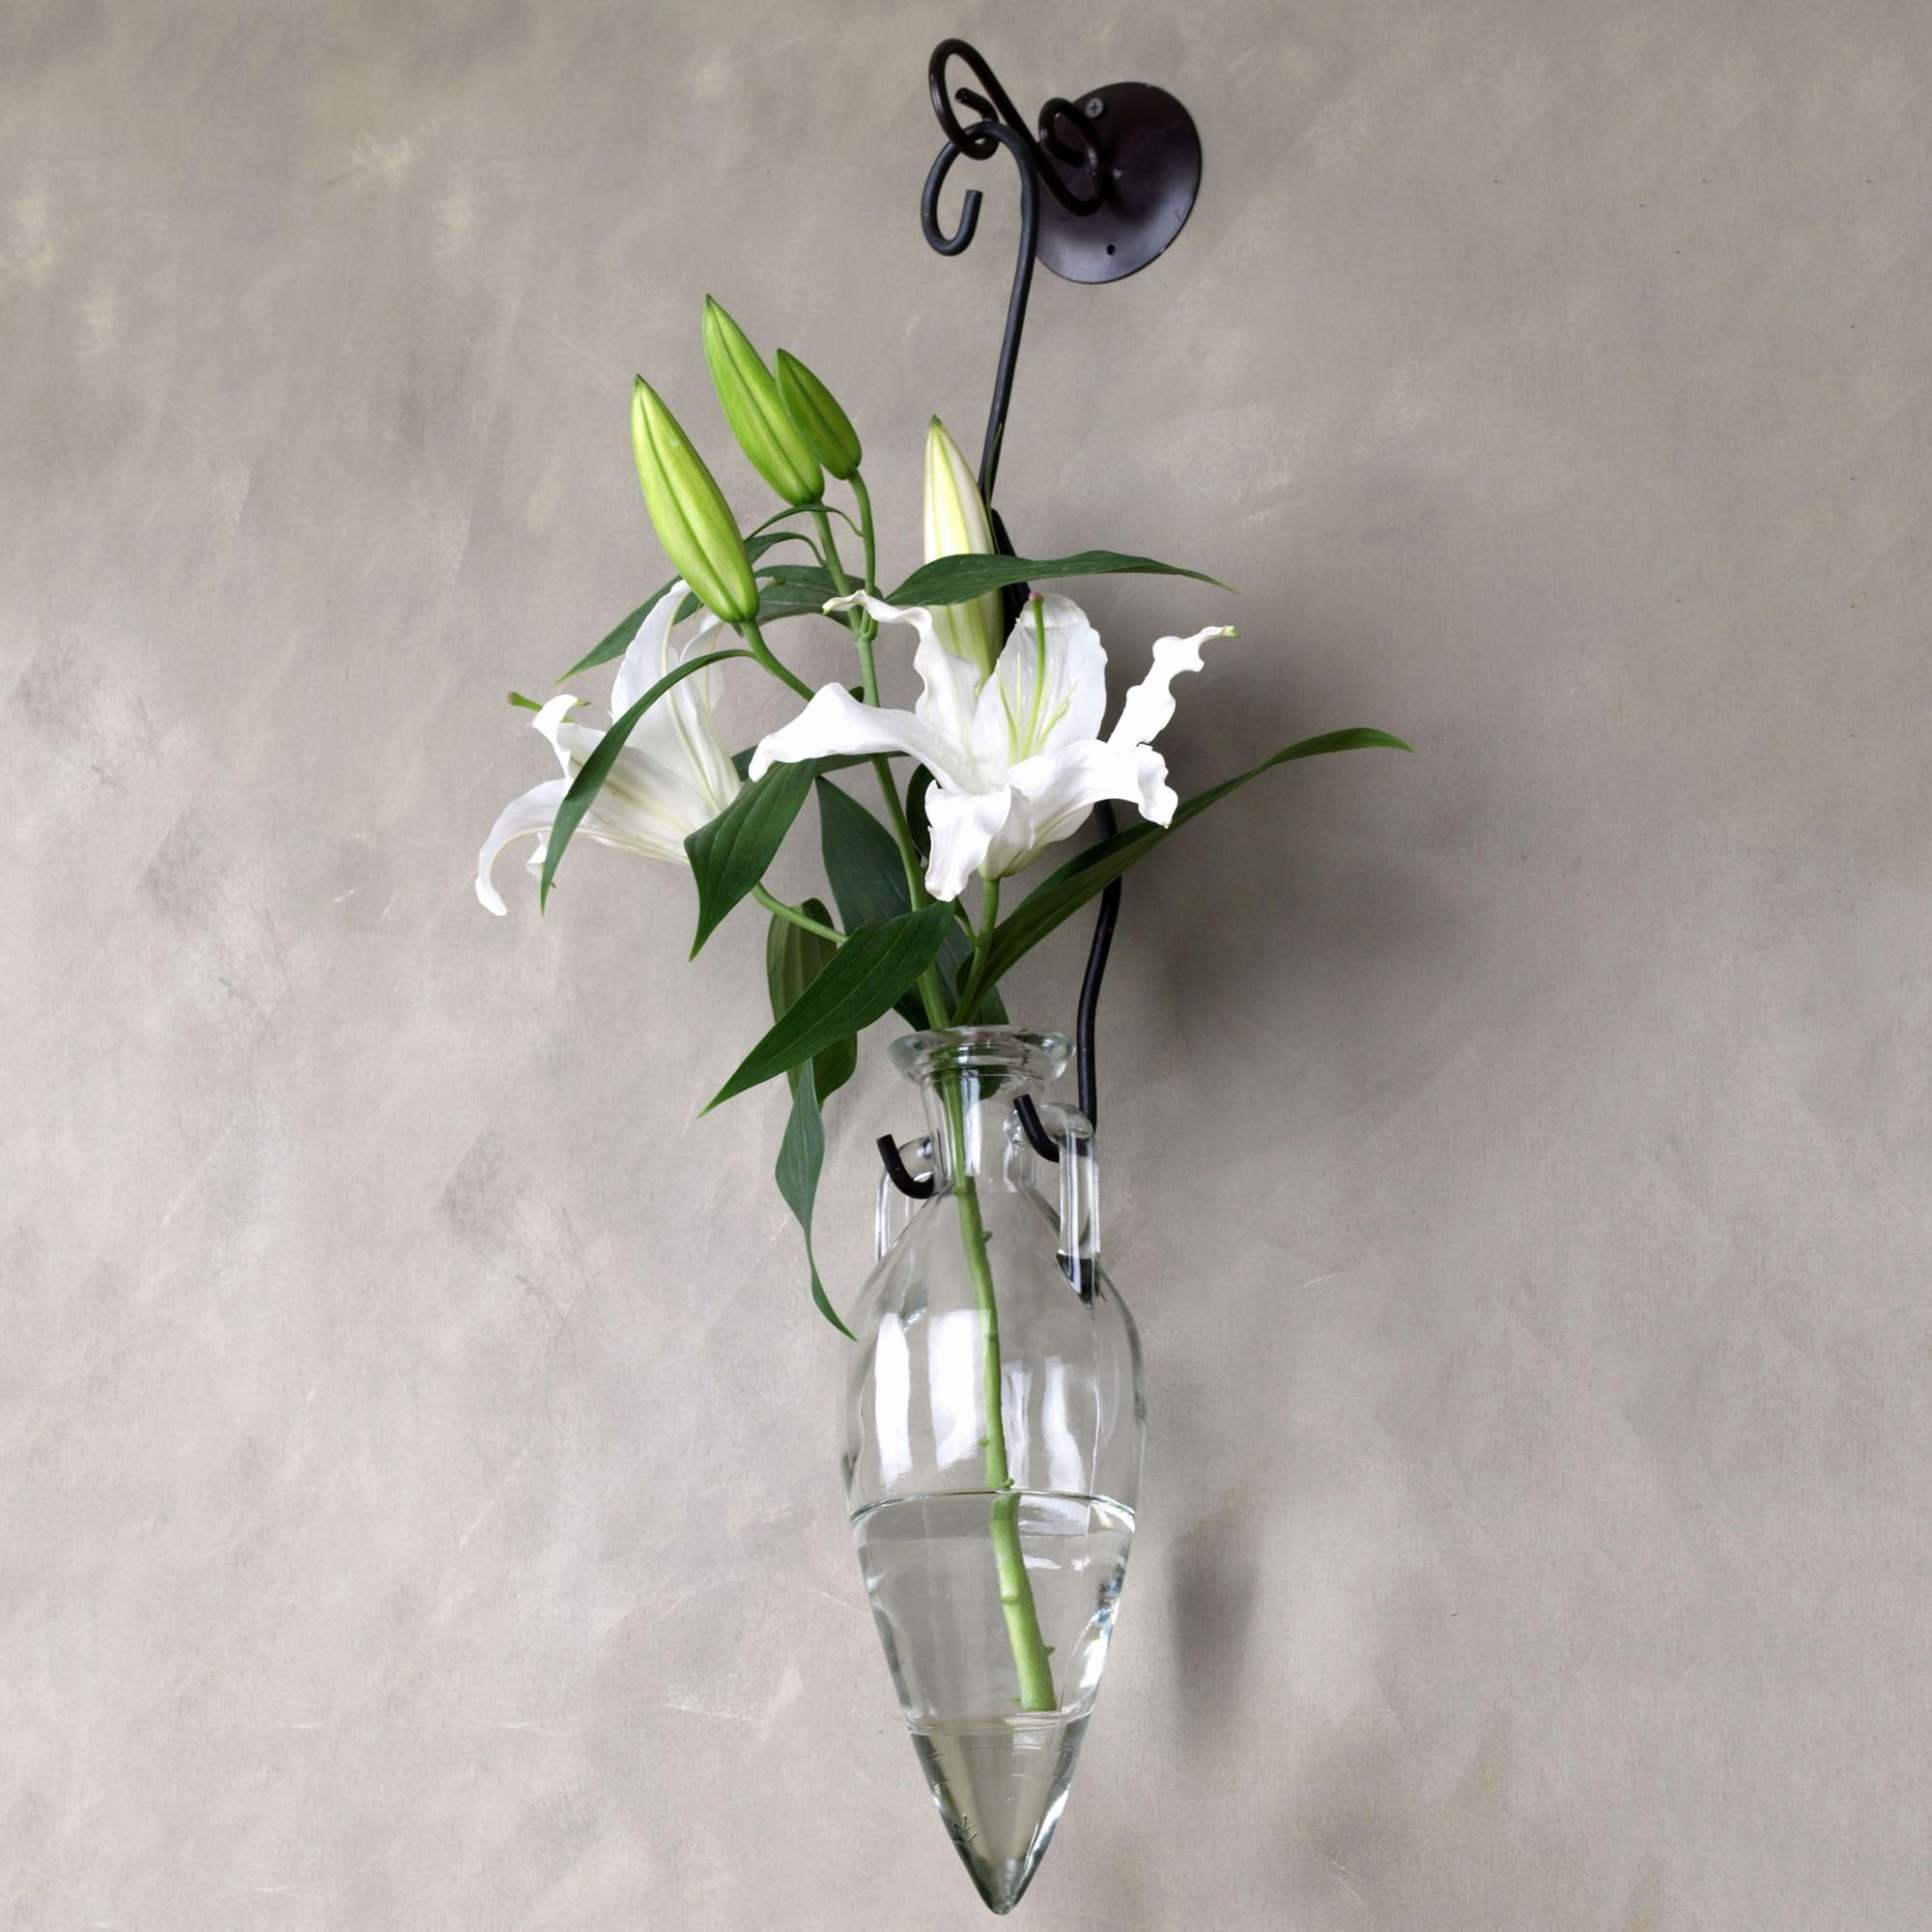 29 Best Cheap Flowers with Free Vase 2024 free download cheap flowers with free vase of hanging flower vase free stock photo image wallpaper unique wall bud regarding hanging flower vase free stock photo image wallpaper lovely white wall vase col